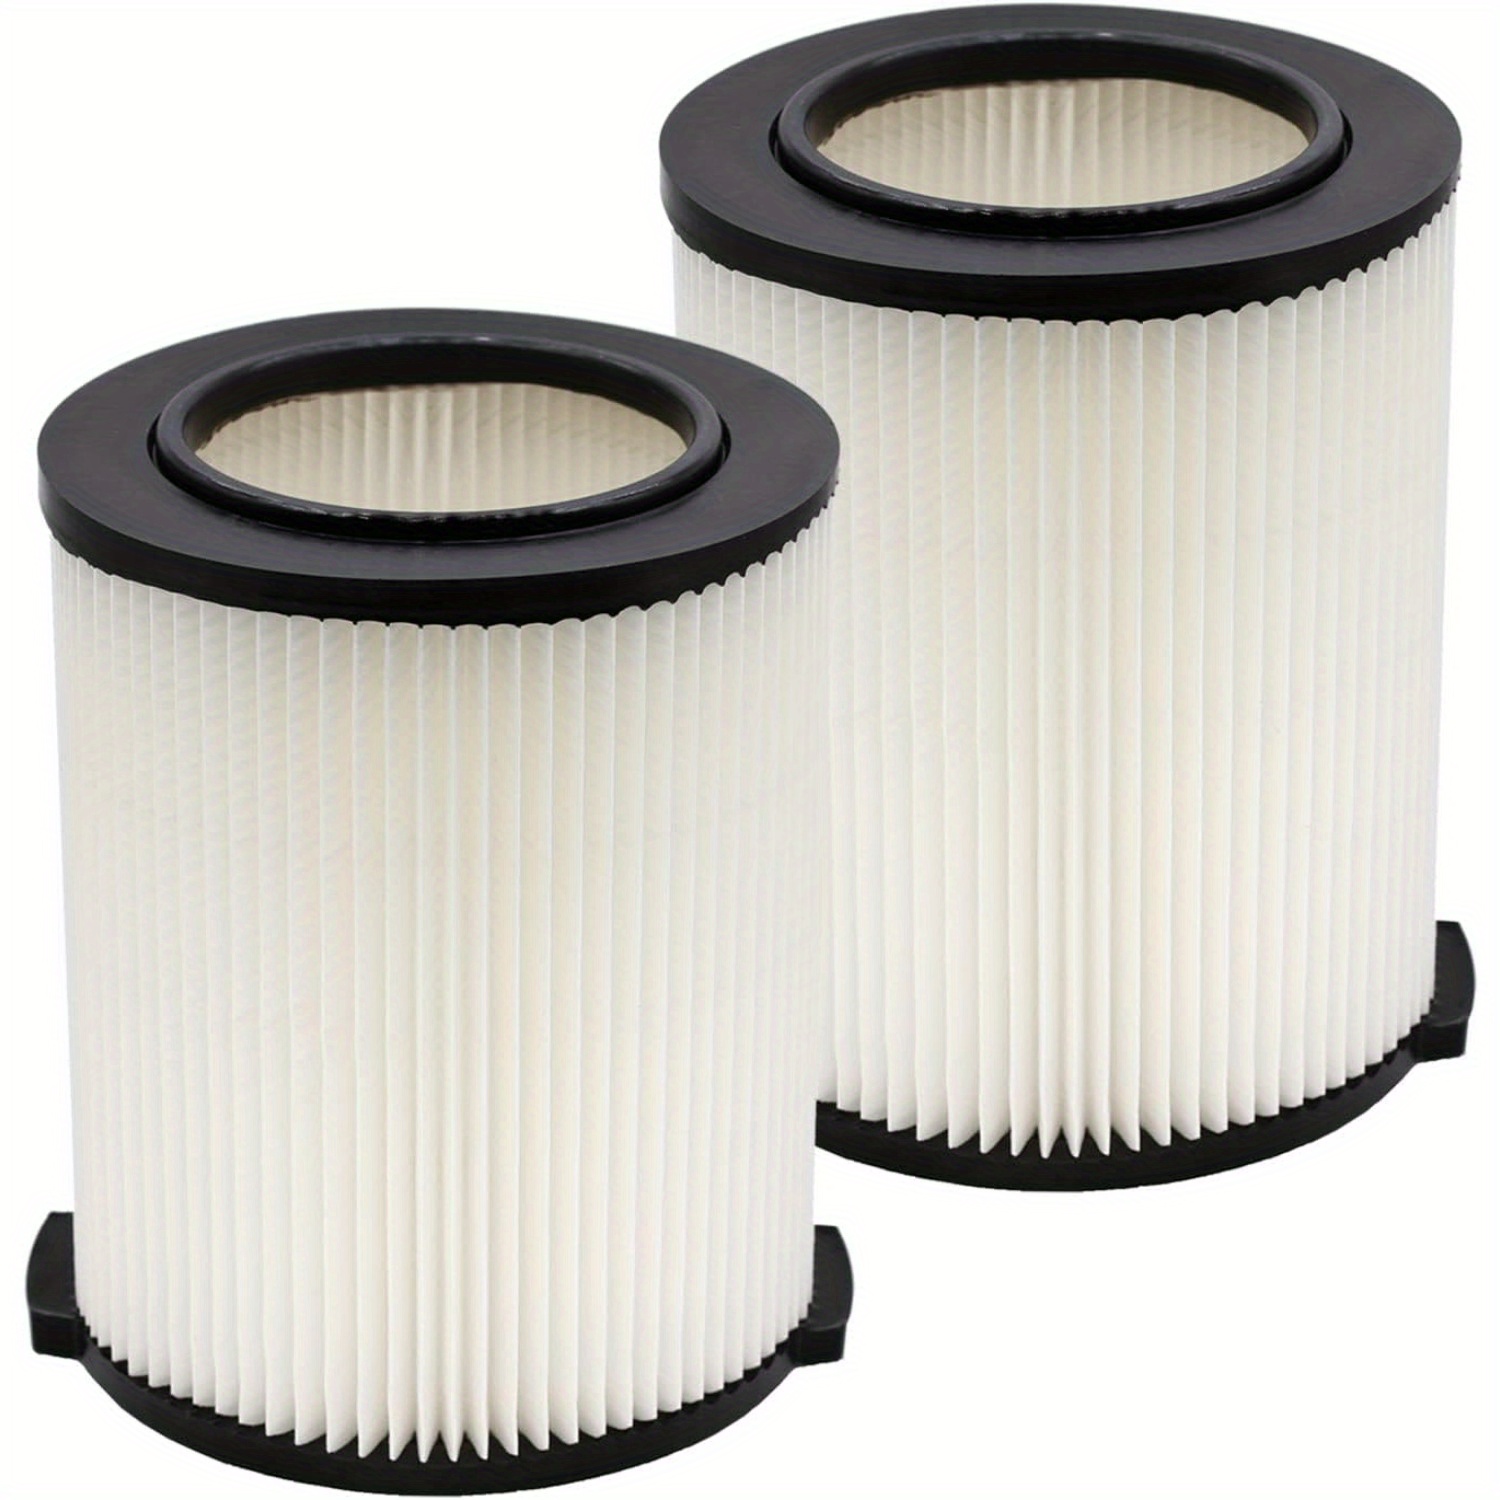 

2 Pack Standard Wet/dry Vac Filter Vf4000 Compatible With Ridgid Vacs 5-20 Gallons Vacuum Cleaner, Replacement Vf4000 Filter